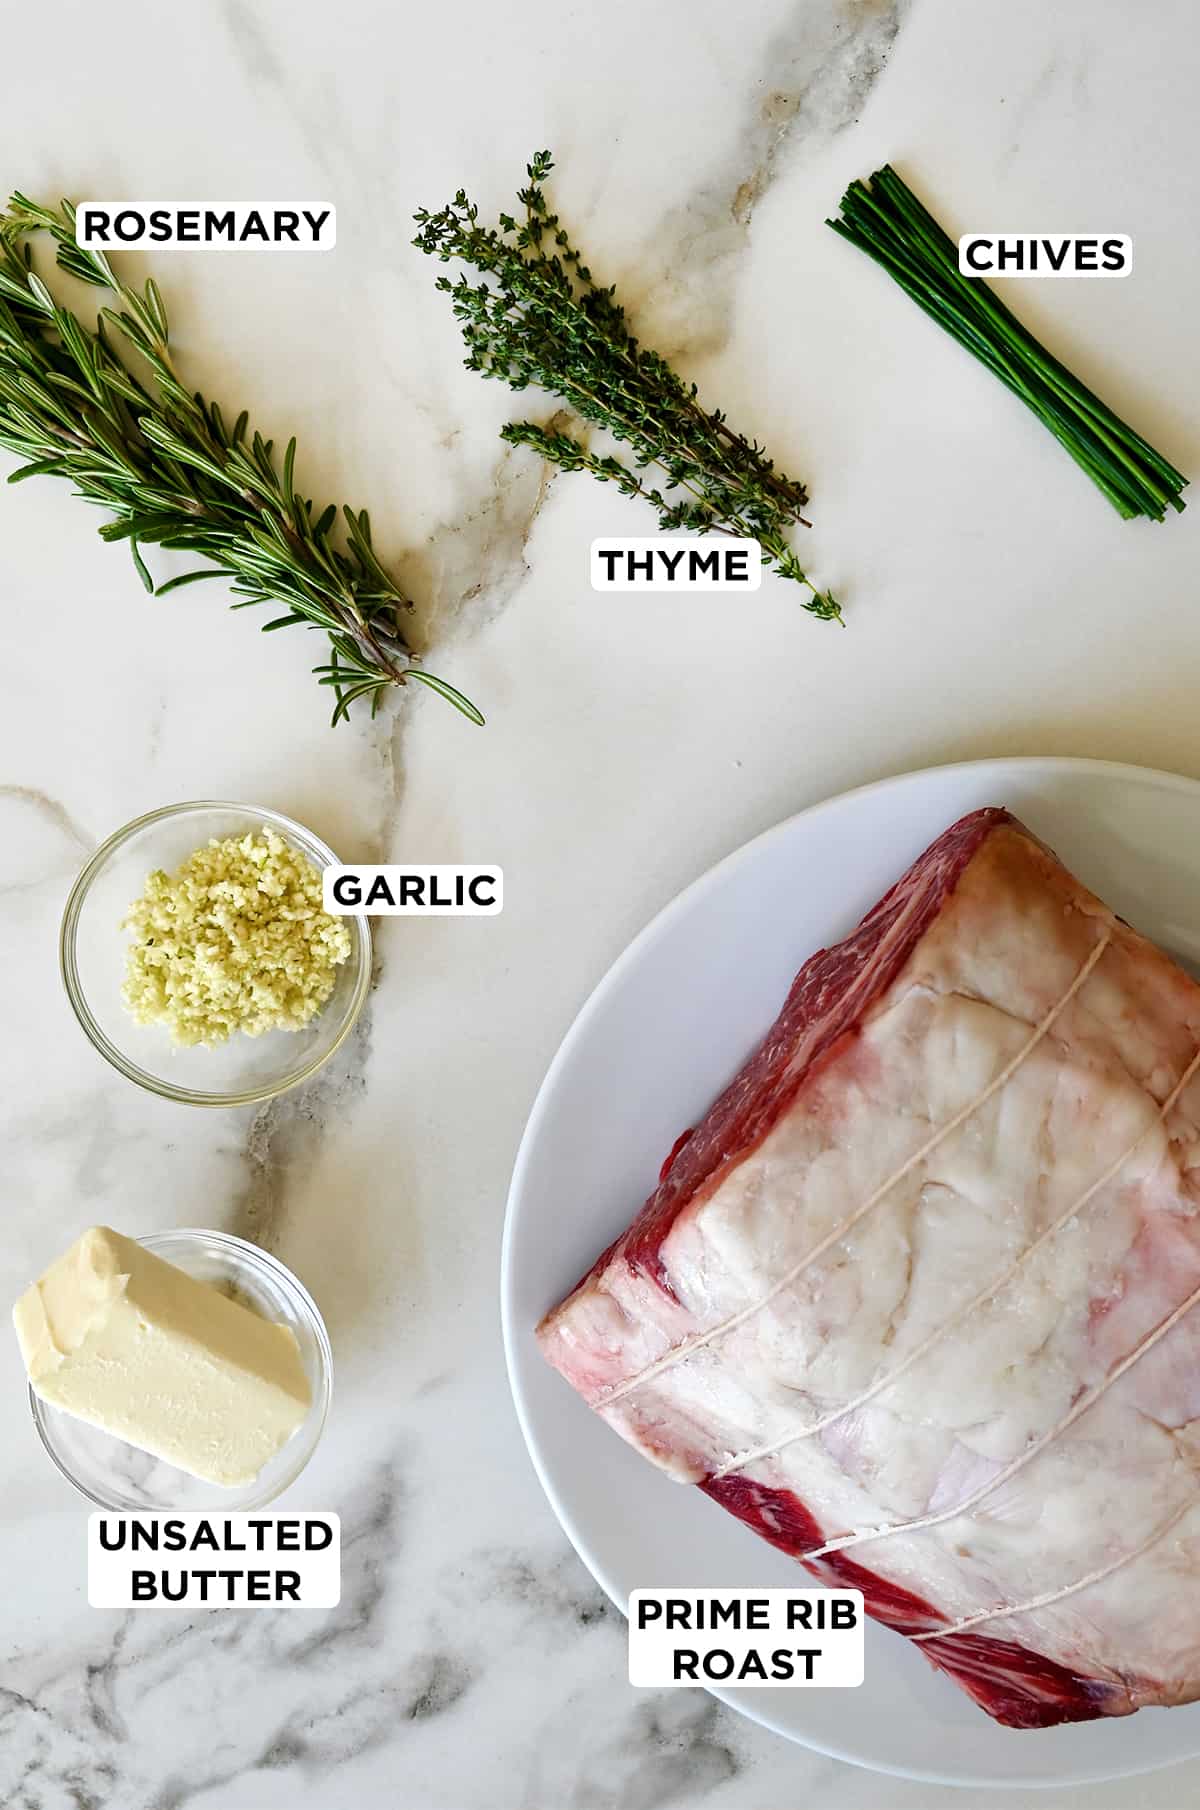 Sprigs of fresh rosemary and thyme next to fresh chives, a prime rib roast on a white plate, unsalted butter in a clear bowl and minced garlic in a bowl. 